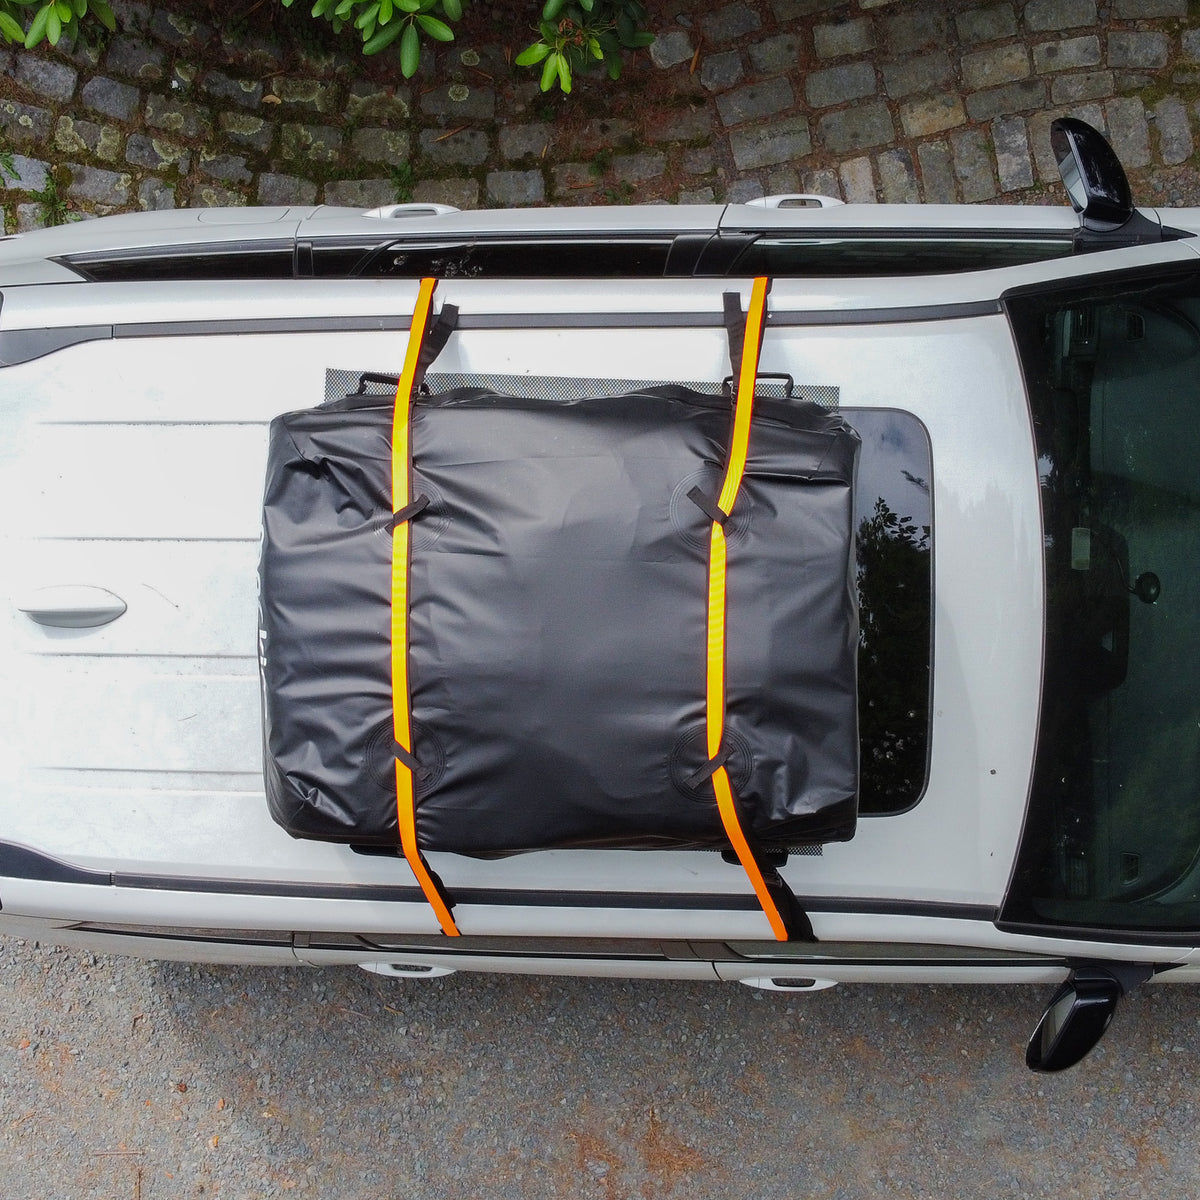 Mockins Rooftop Cargo Bag On Top Of The Car With Ratchet Straps